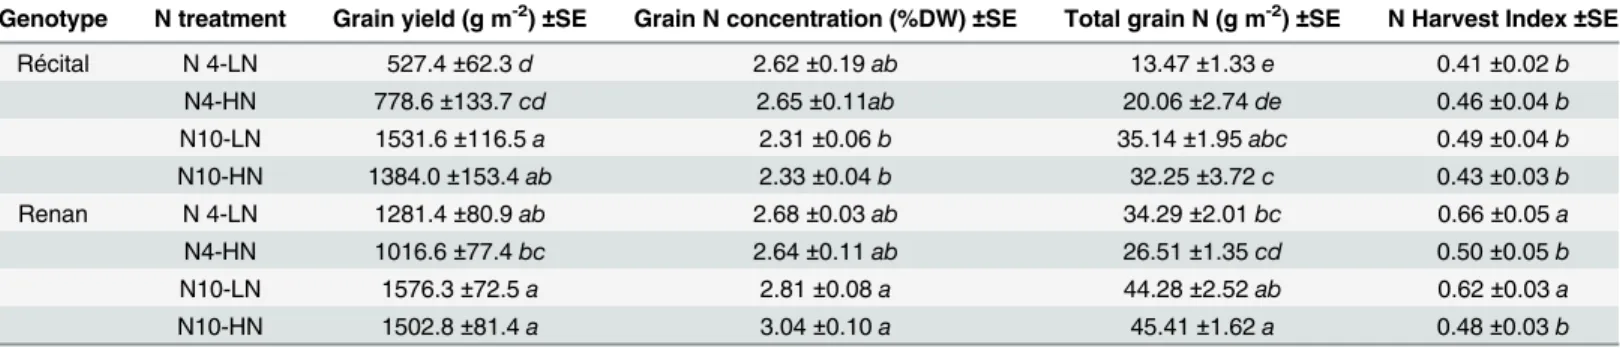 Table 2. Grain yield, grain N concentration, total grain N and N harvest index at maturity for the two genotypes studied under four N treatments.